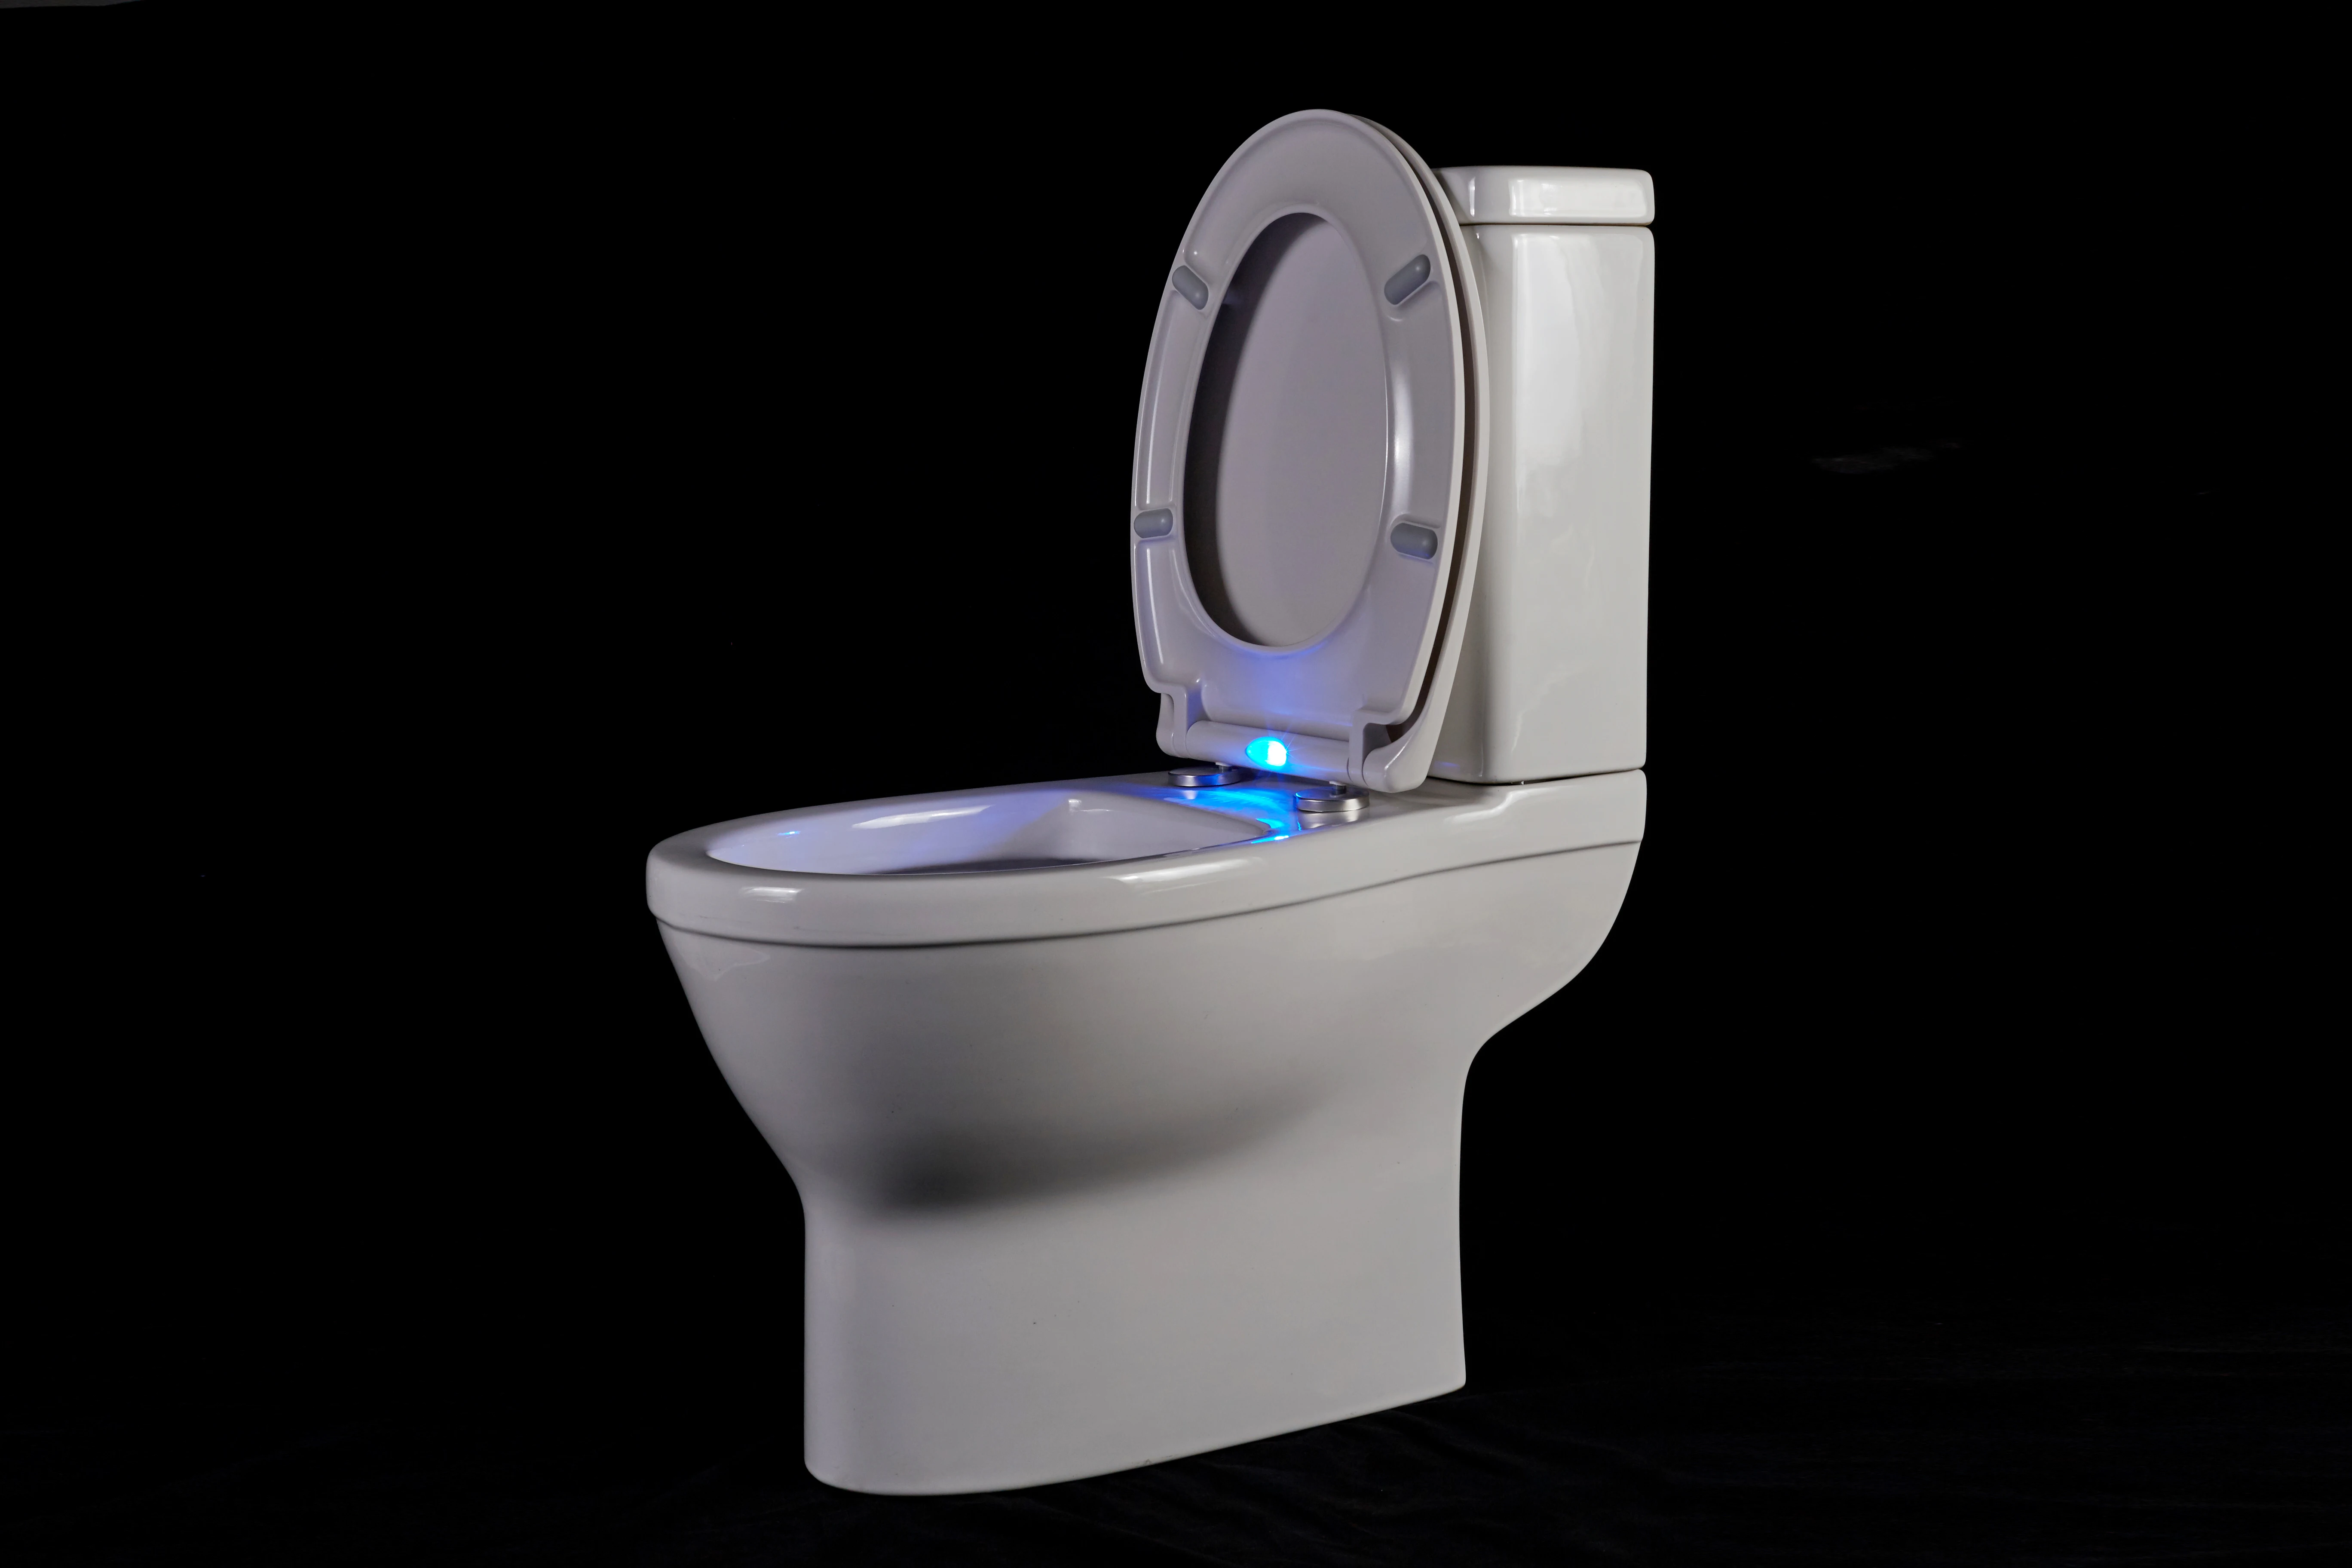 Universal  one button and quick release urea Led  Toilet seat